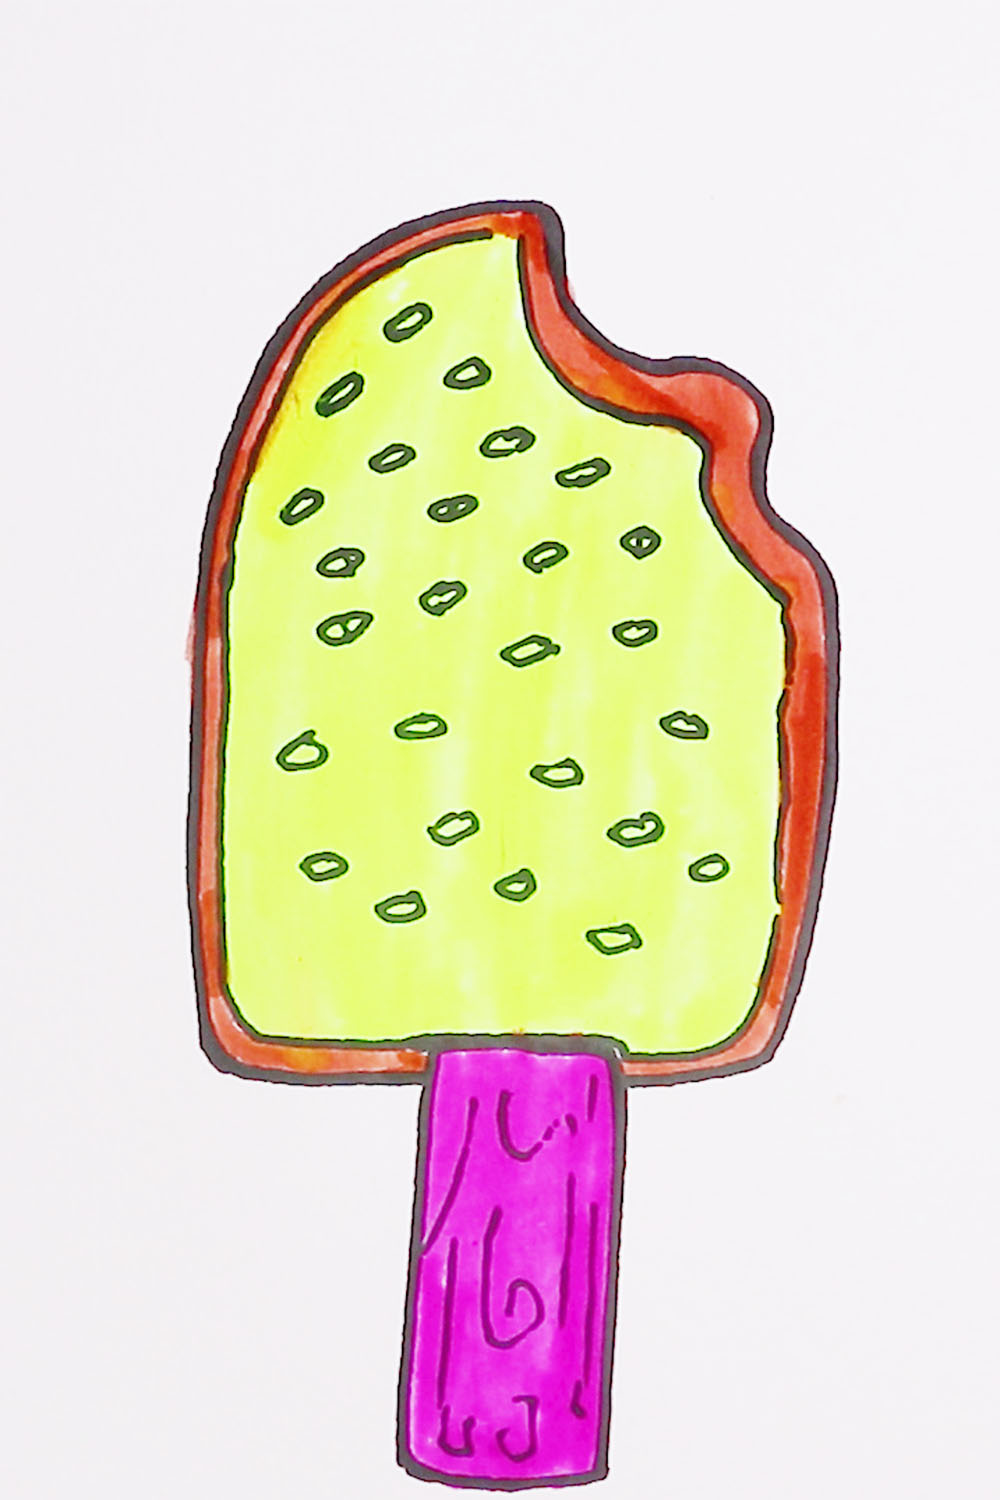 How to draw and color ice cream